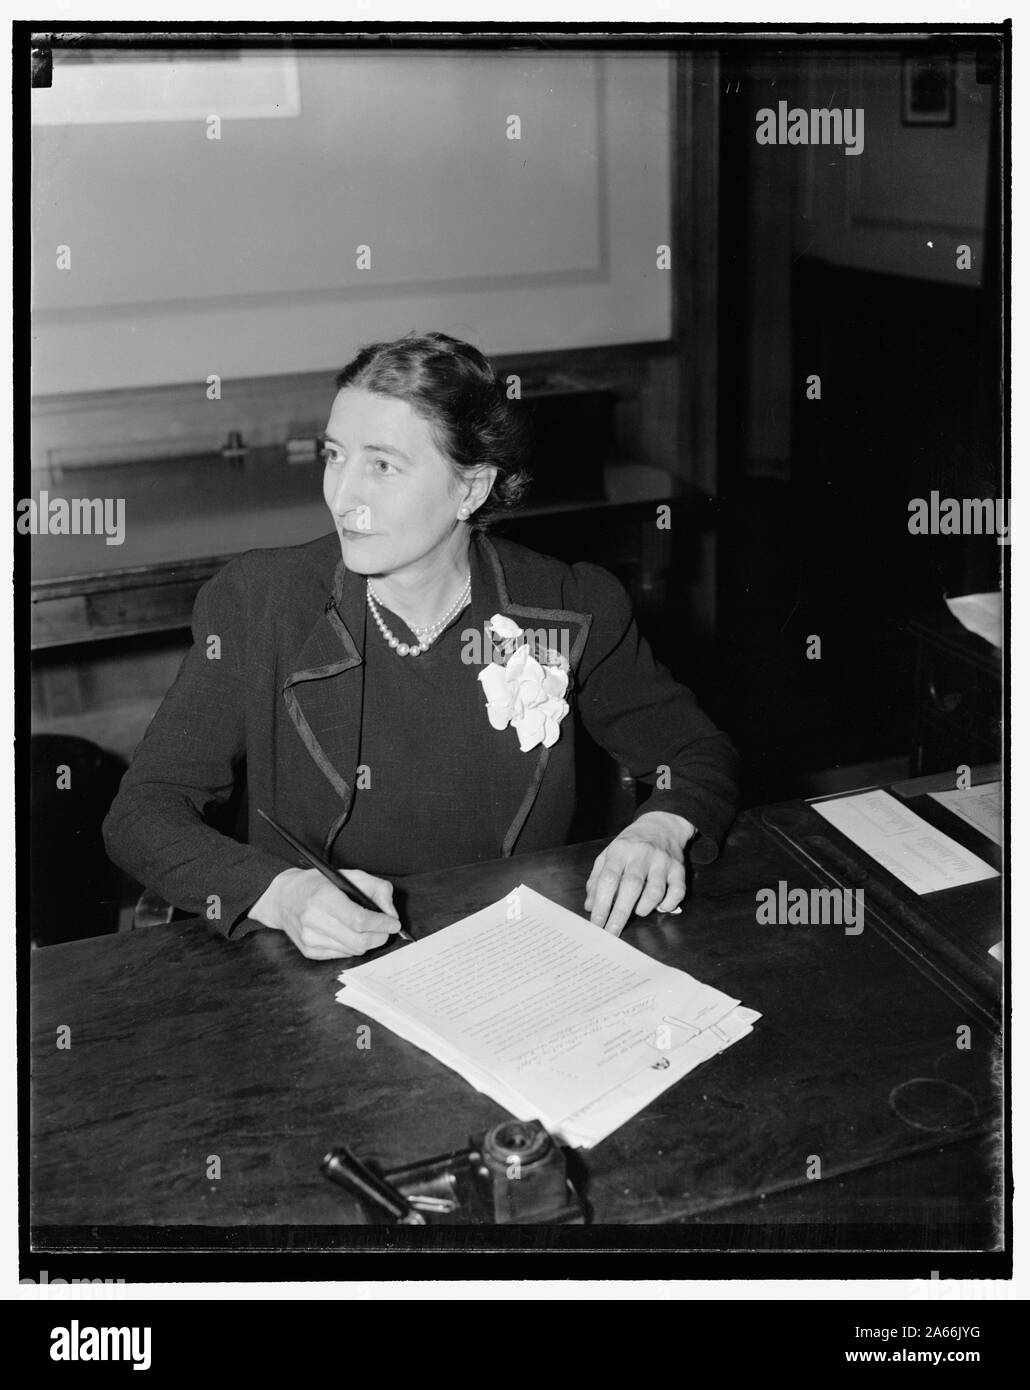 Washington, D.C., Dec. 14. Miss Helen Hironimus has been appointed by the Attorney General to Superintendent of the new Federal Institution for Women at Dallas, Texas. A graduate of the Washington College of Law, she has been Assistant Superintendent of the Federal Reformatory for Women at Alderson, W. Va., since April 1, 1929. Miss Hironimus is a native of Mt. Vernon, Indiana Stock Photo